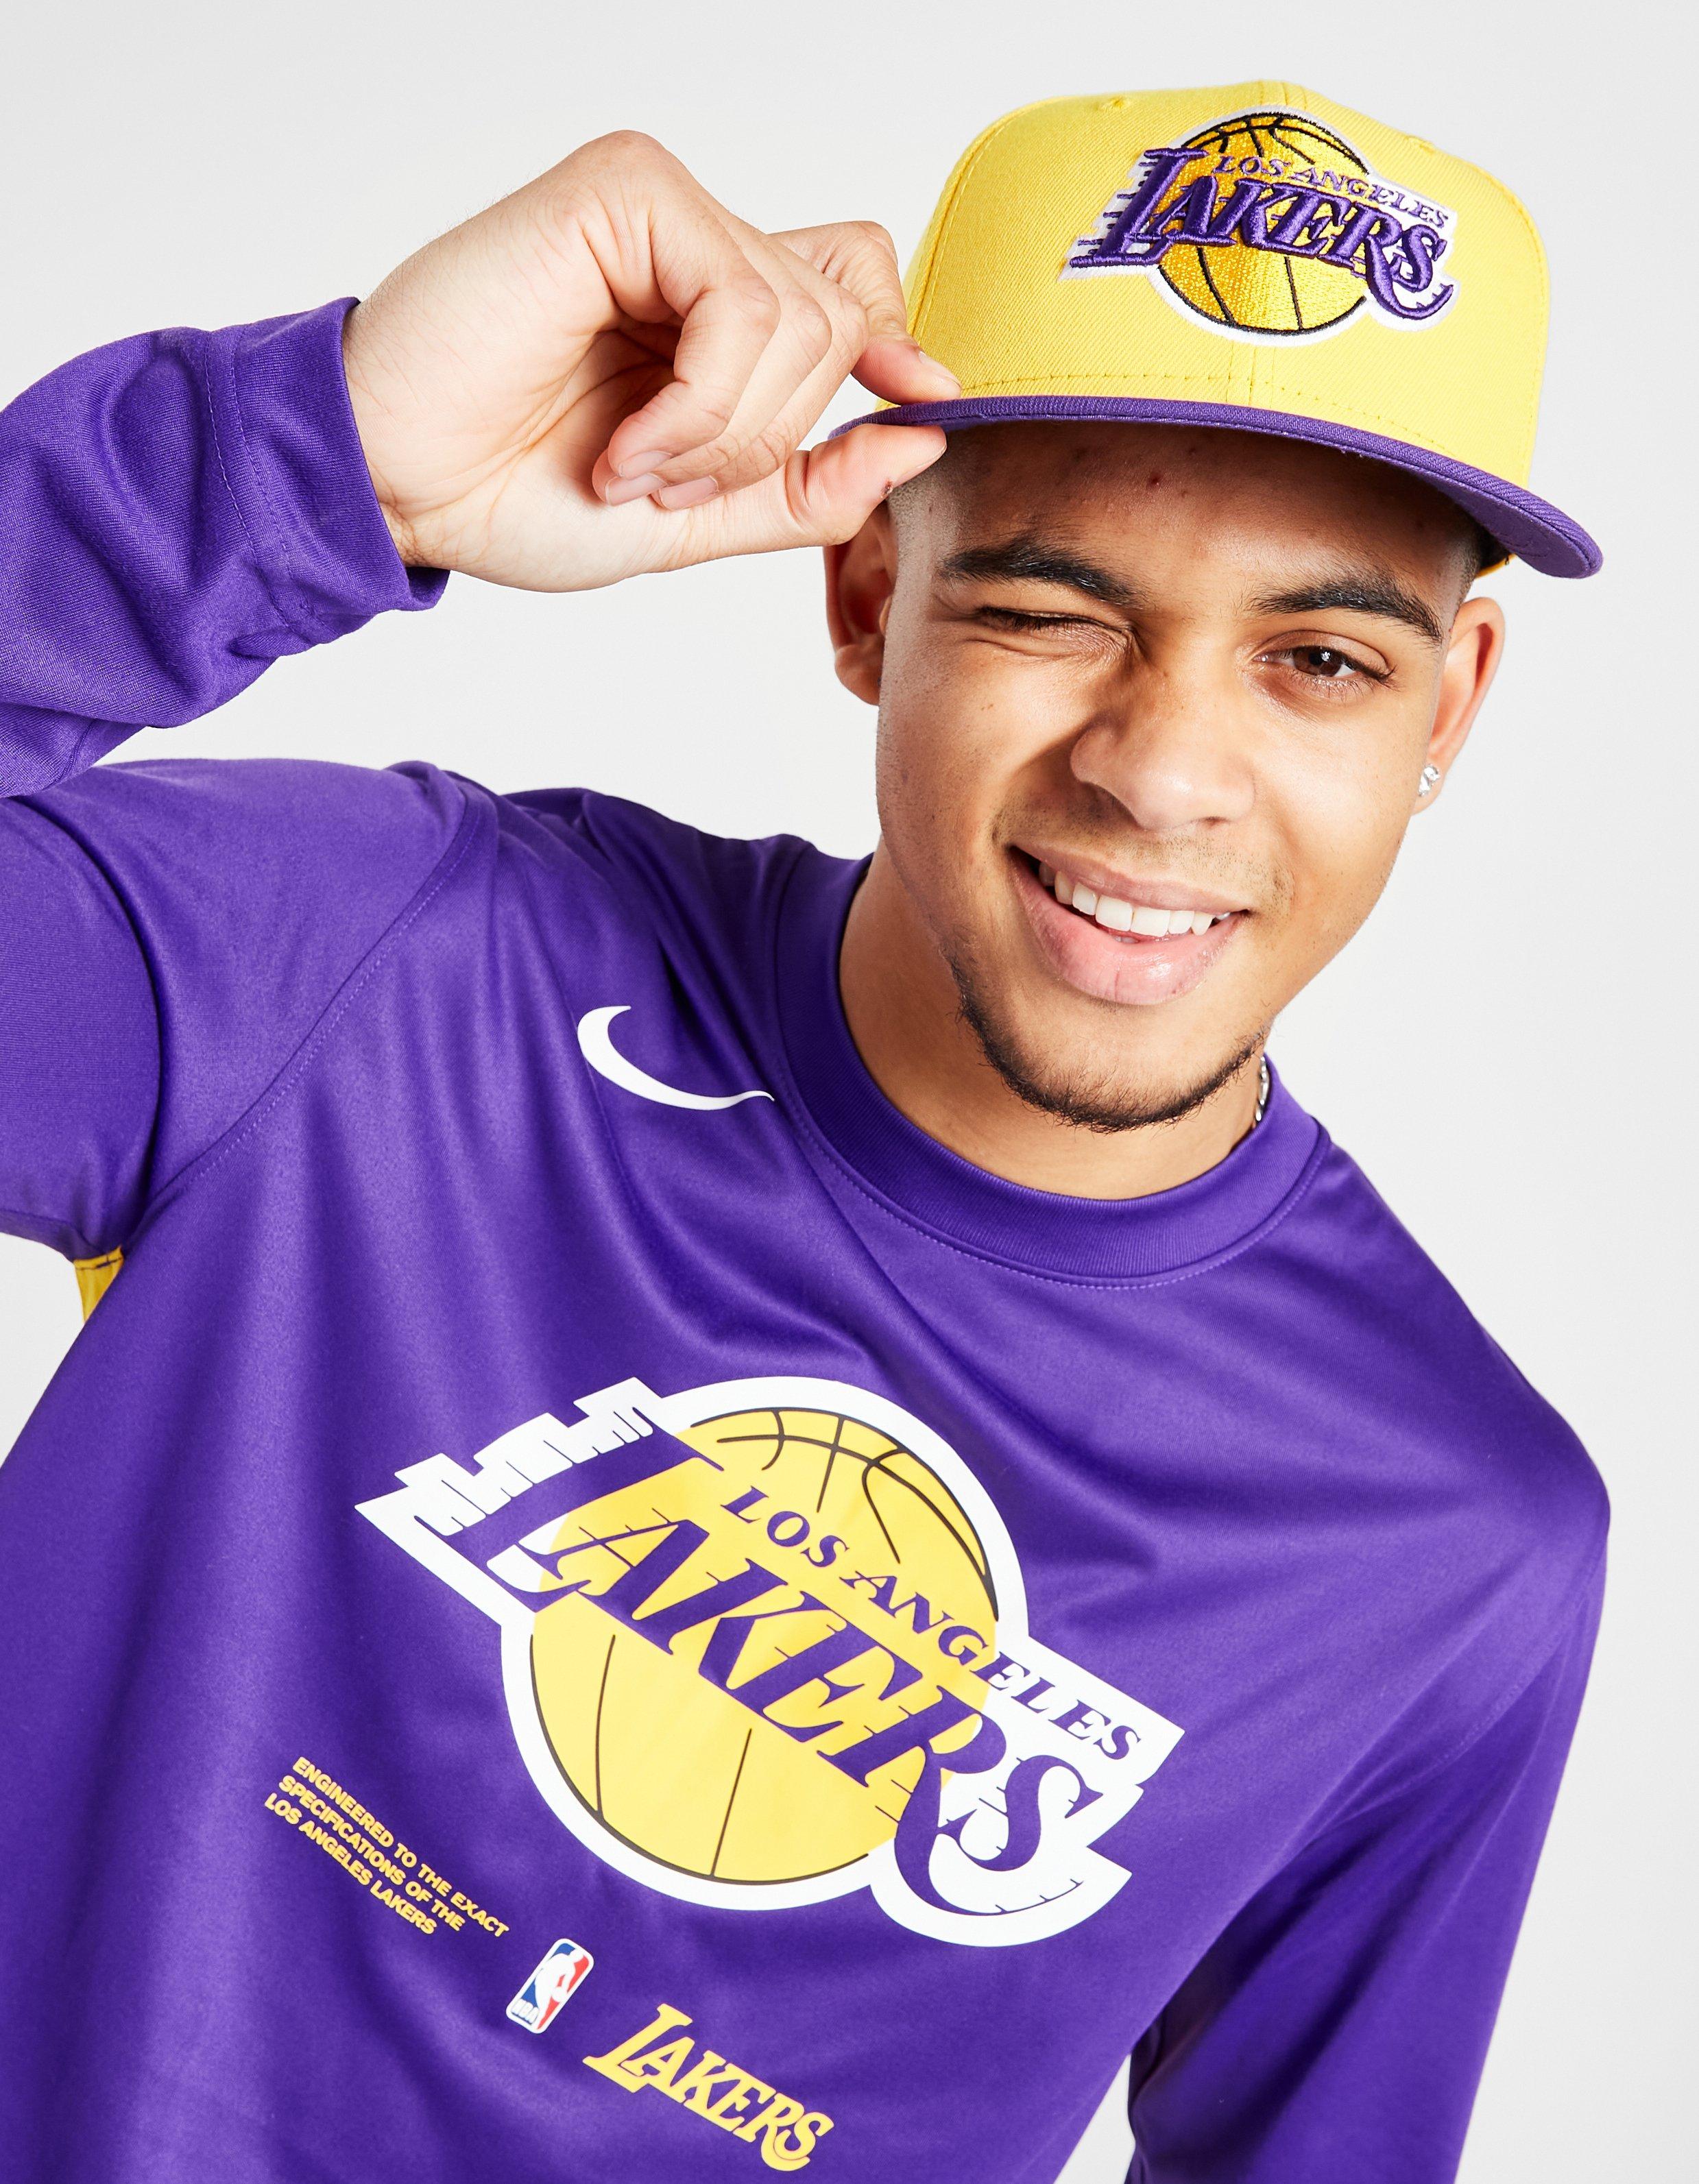 Los Angeles Lakers Jersey Style Mitchell & Ness Snapback Hat